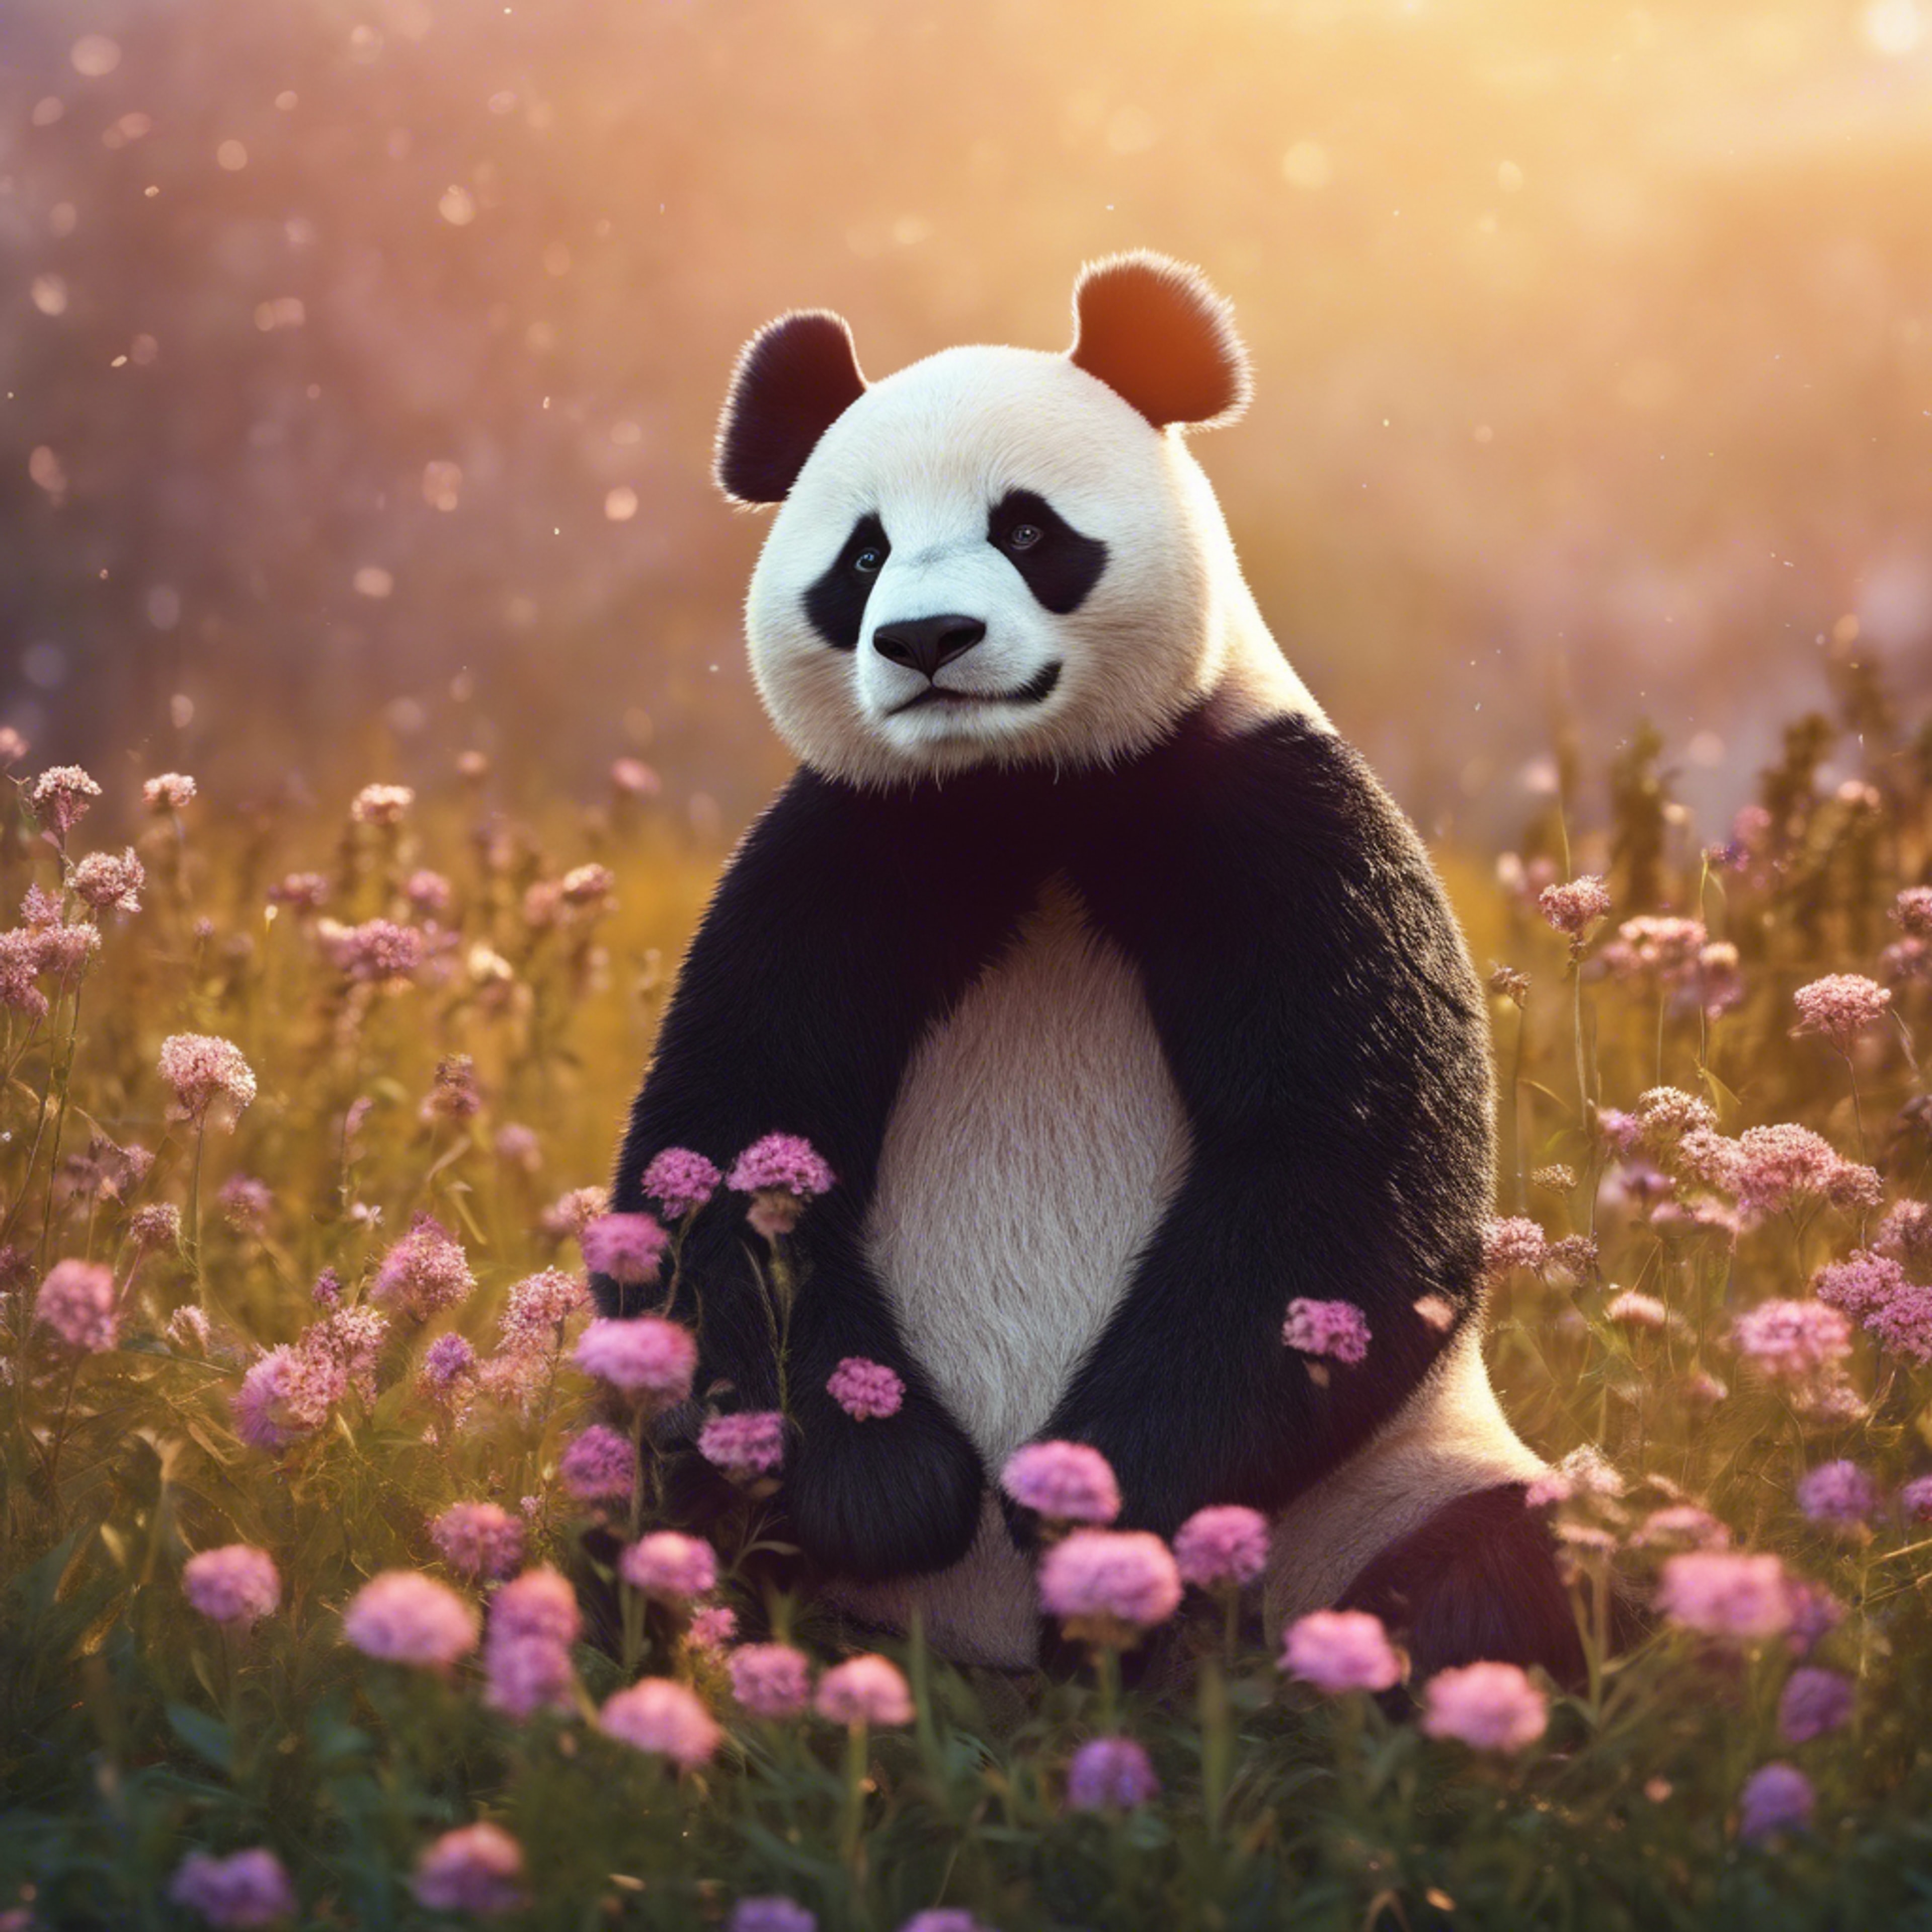 Beautiful illustration of a panda relaxing under the glow of the setting sun, surrounded by a field of wildflowers. Tapéta[4e88d1ee586942fa837d]